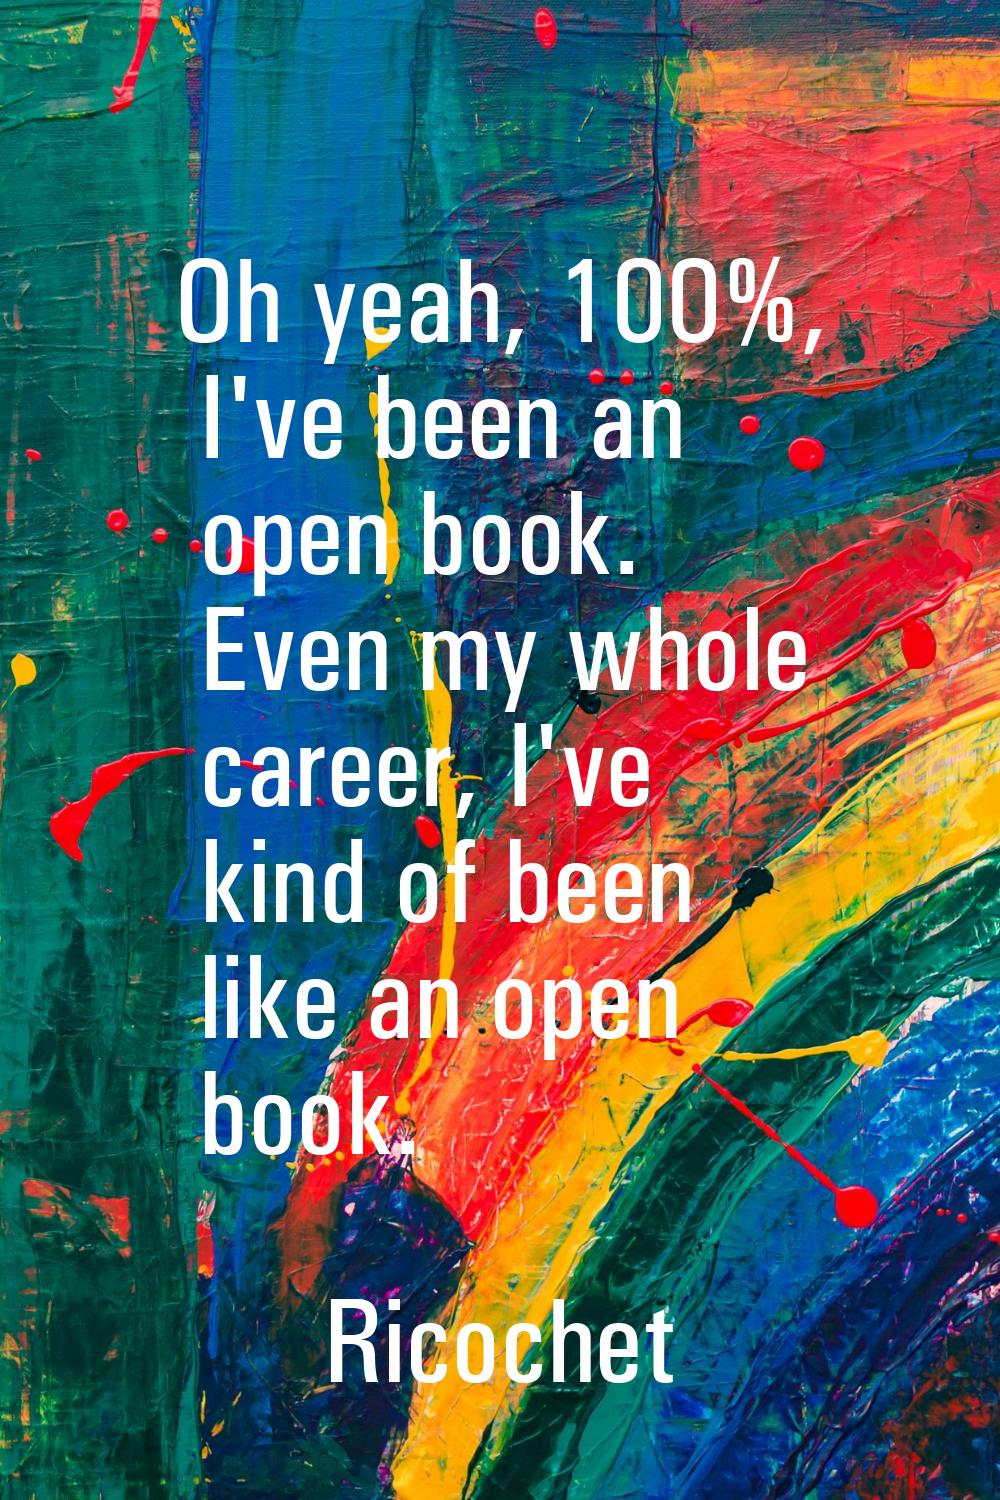 Oh yeah, 100%, I've been an open book. Even my whole career, I've kind of been like an open book.